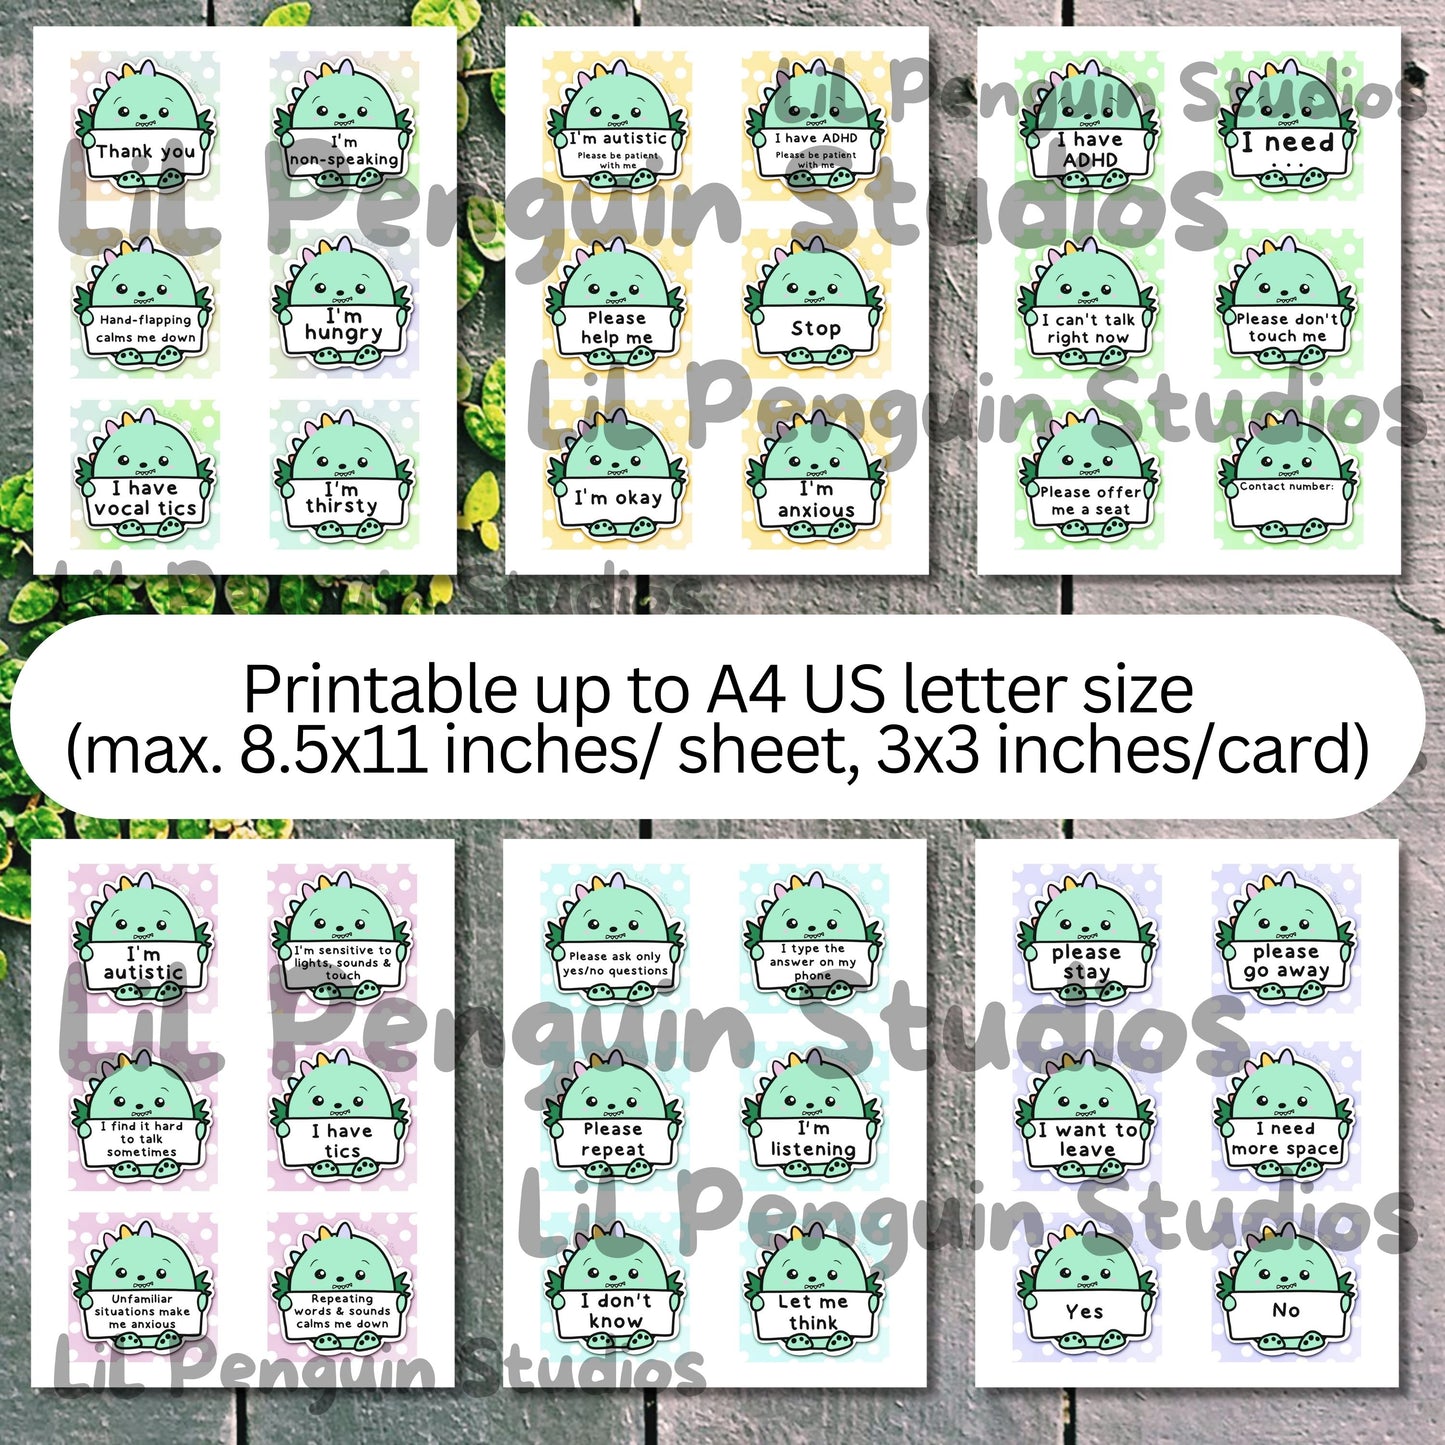 Communication Cards & Affirmation Cards (Digital) ft. Kex, the Dinosaur - Private Practice Use